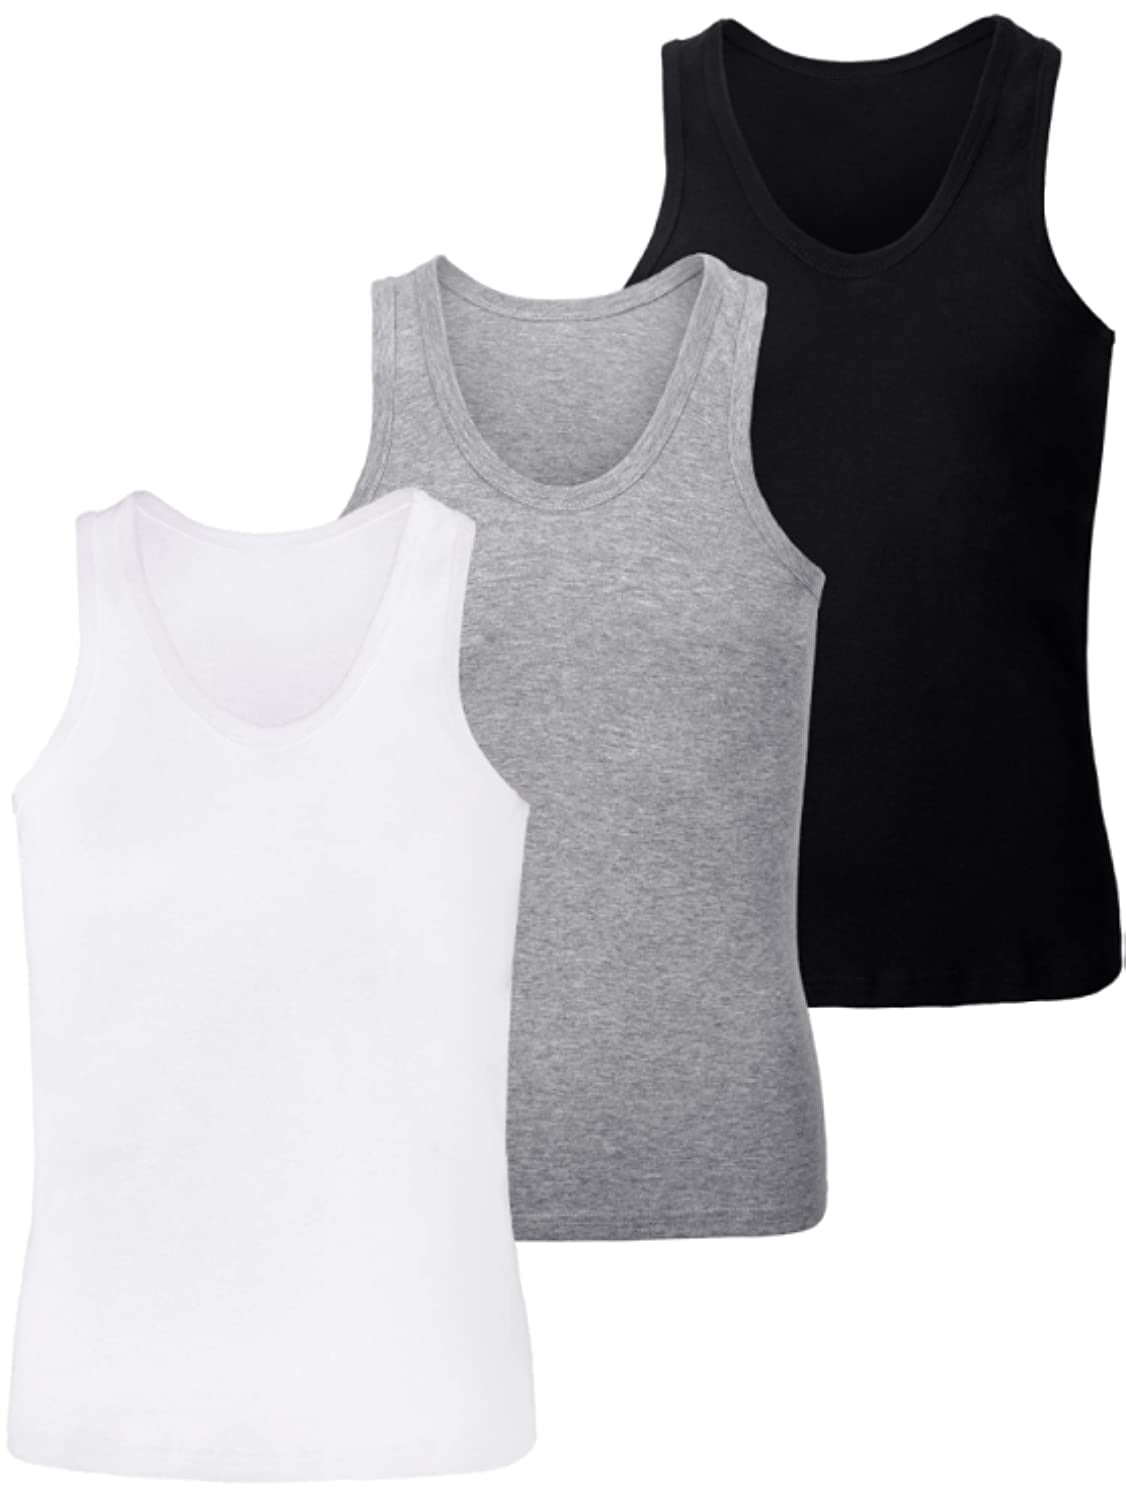 Undershirts For Men Assorted 3 Pack Ribbed Tank Tops - Walmart.com